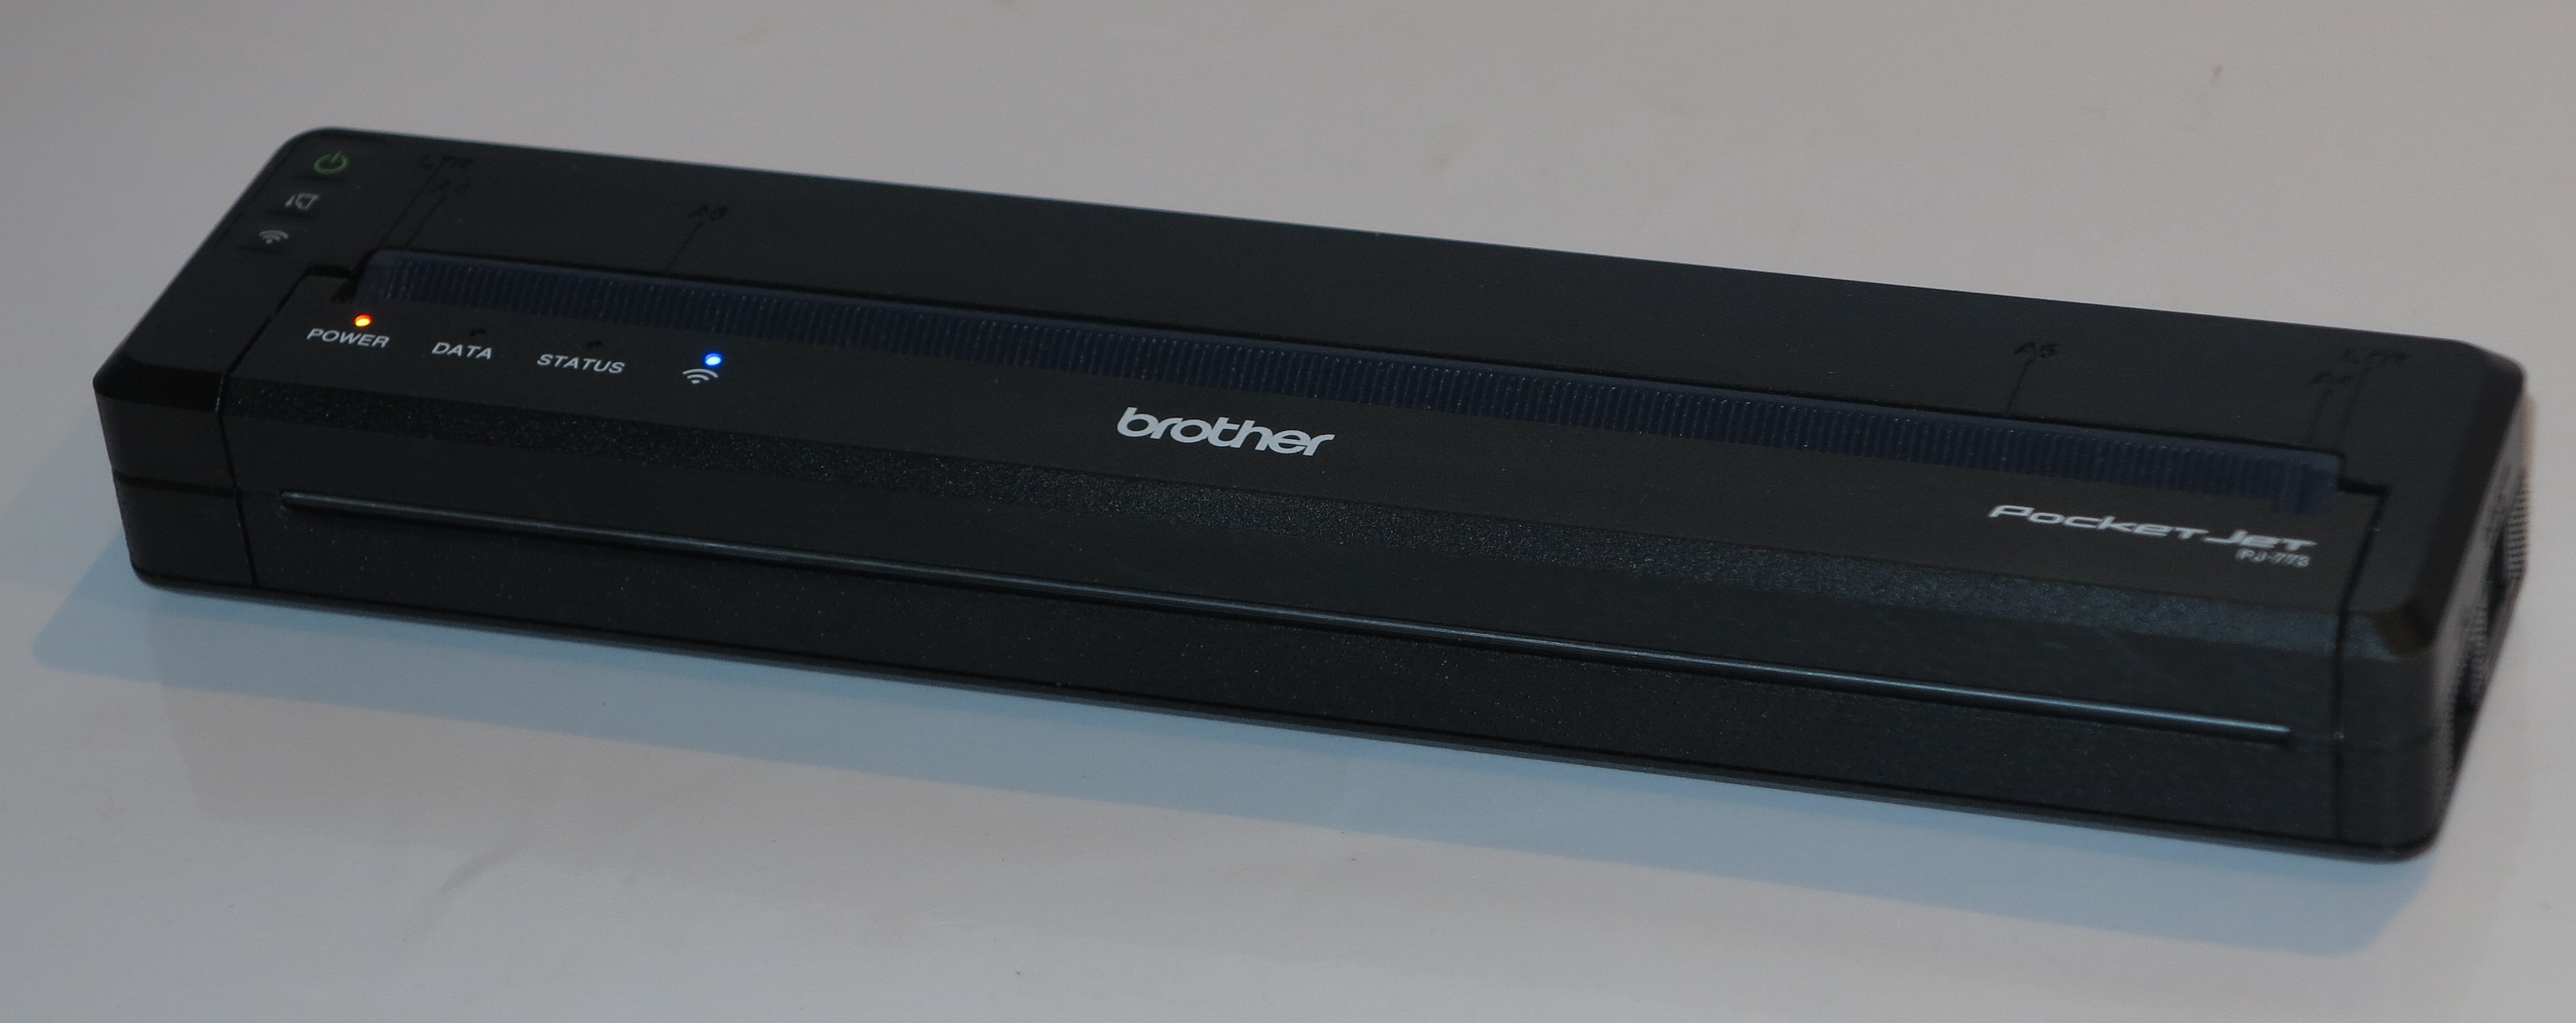 Product Review–Brother PJ-773 Wireless Mobile Thermal Printer